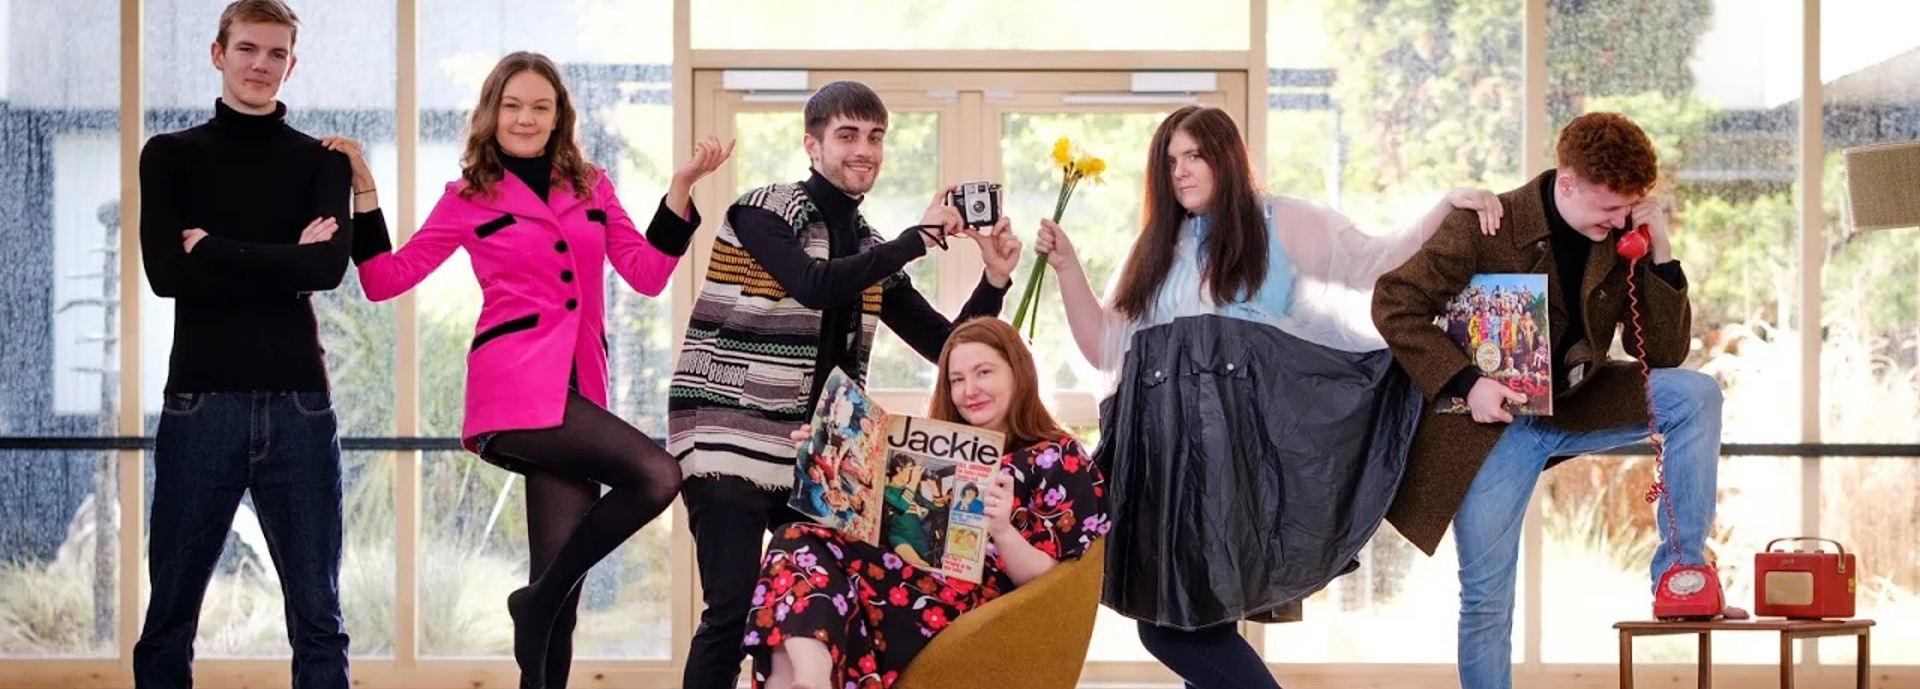 Students pose with items from the 1960s